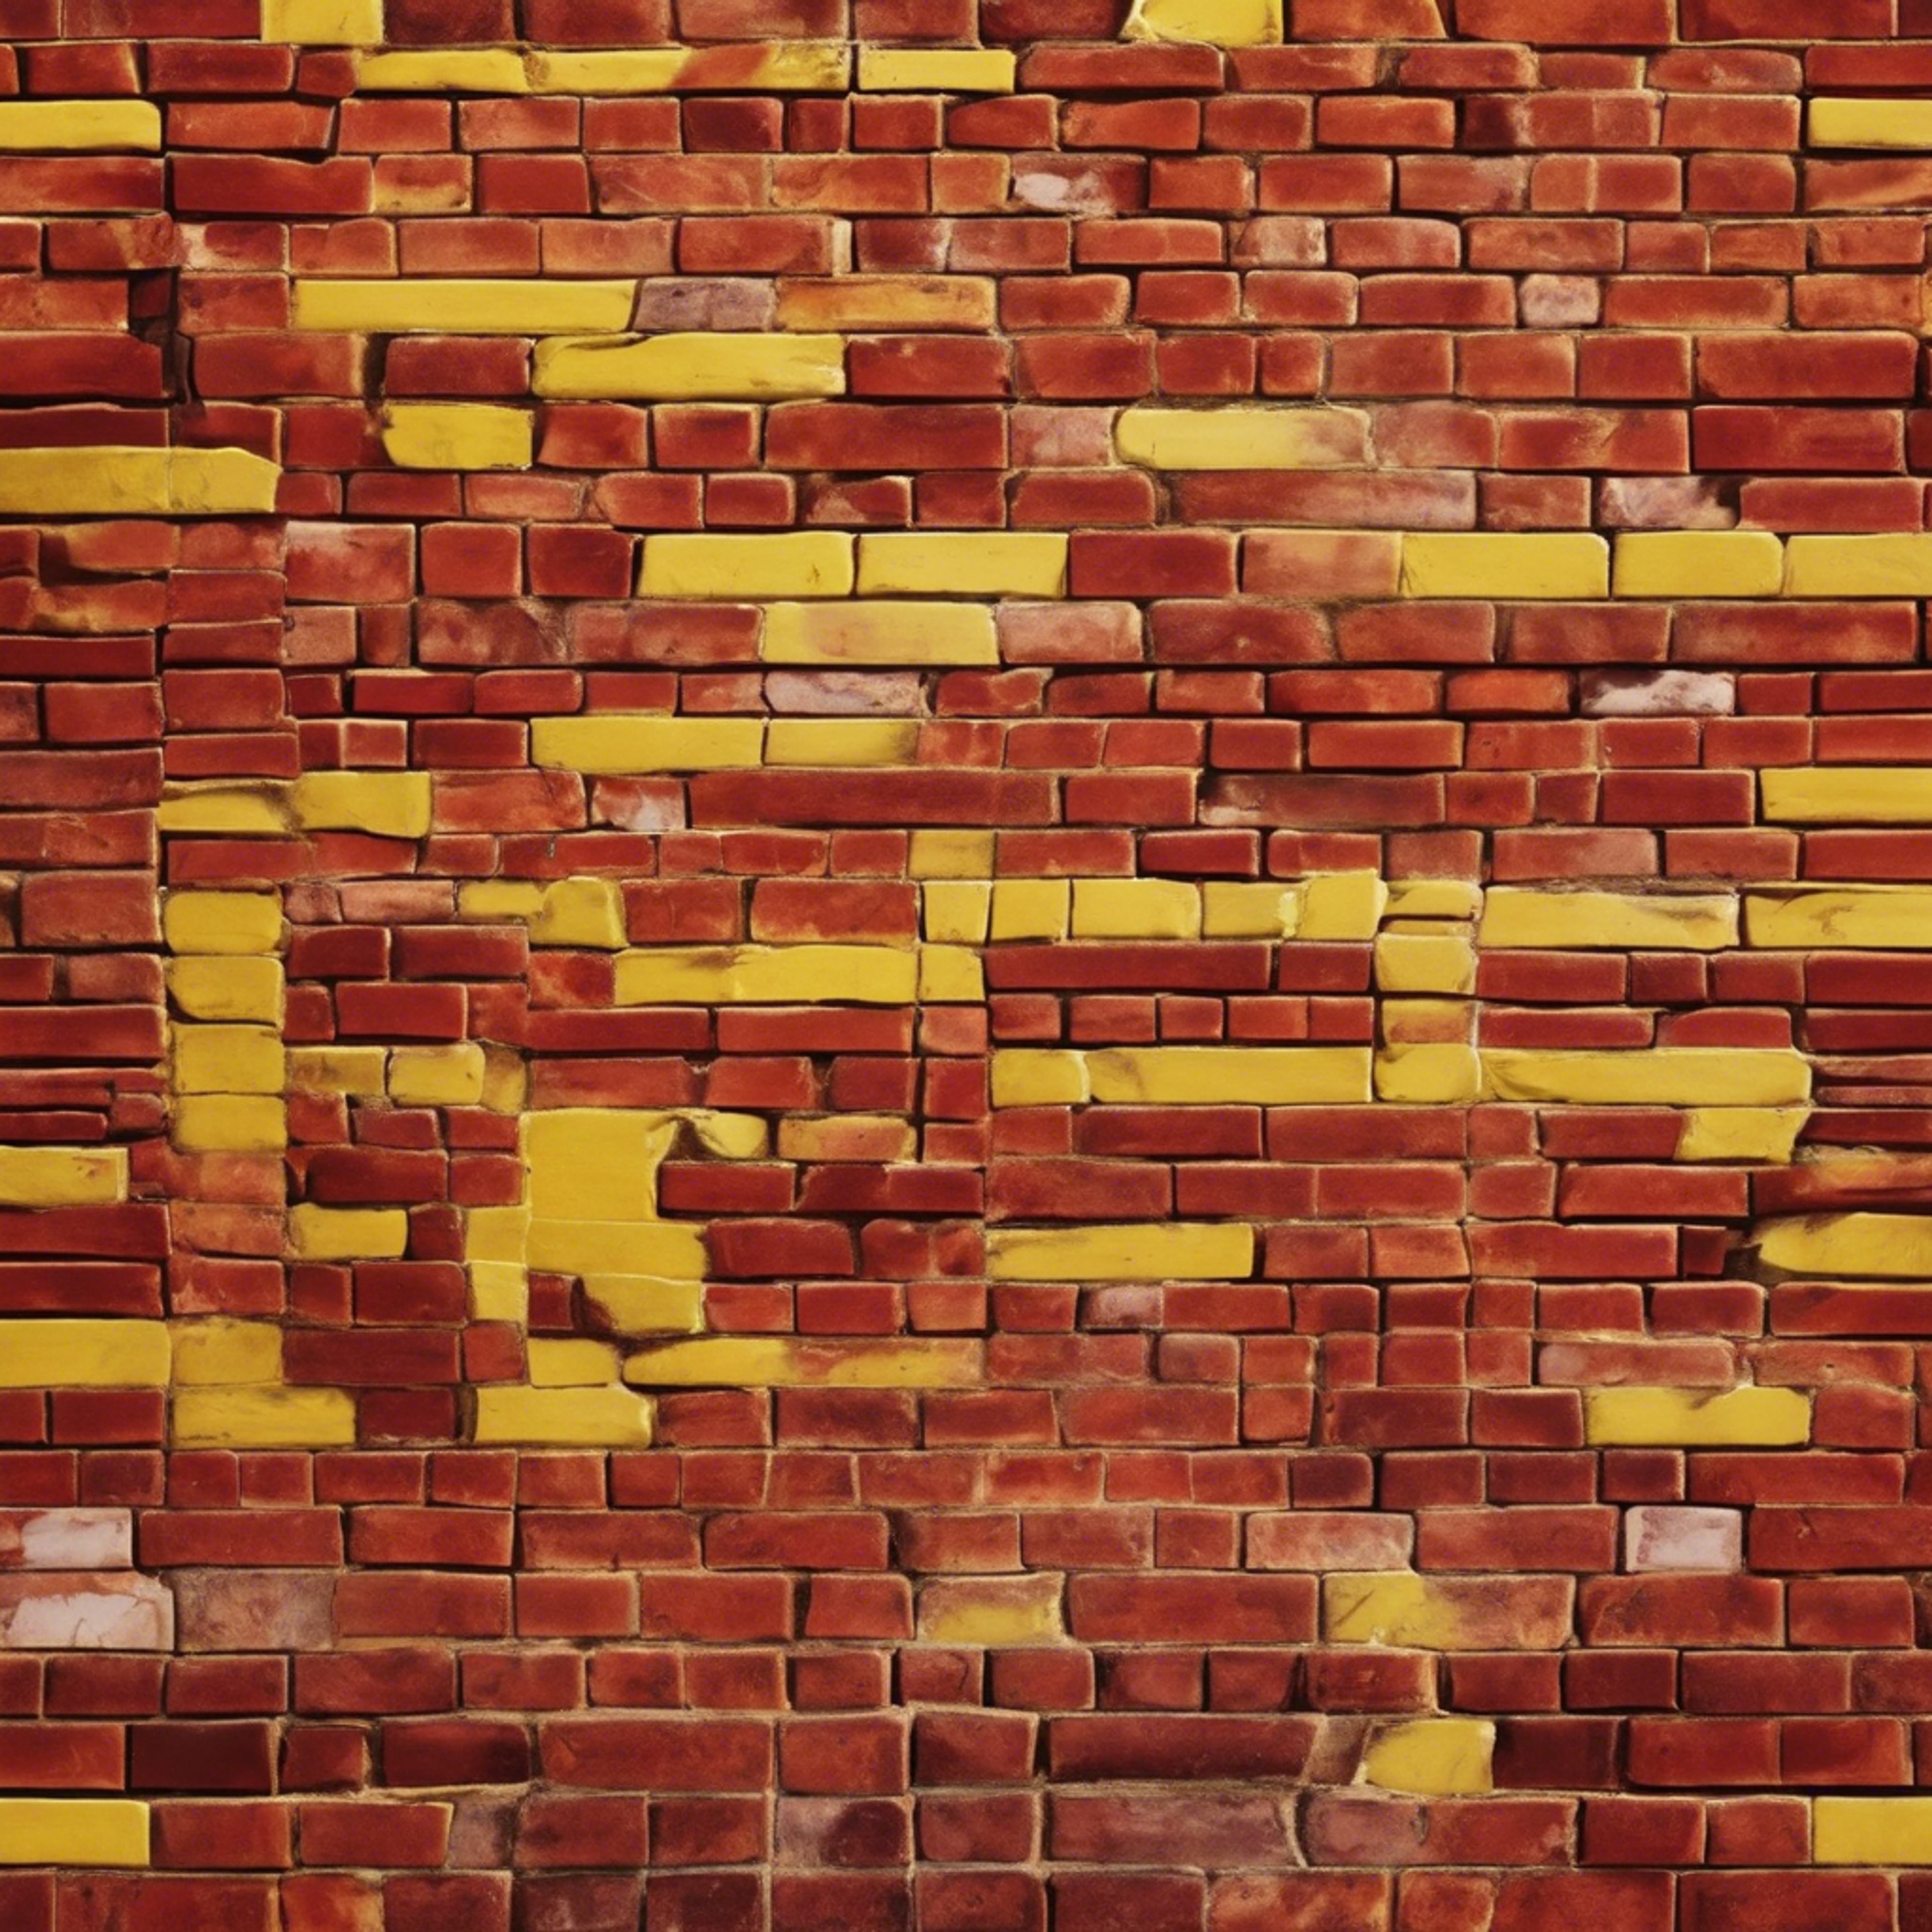 Red and yellow brick pattern seen through the illusion of a watery surface - the bricks appear slightly distorted yet colorful. Tapeta[6ac5a5324f9a41fcbc3c]